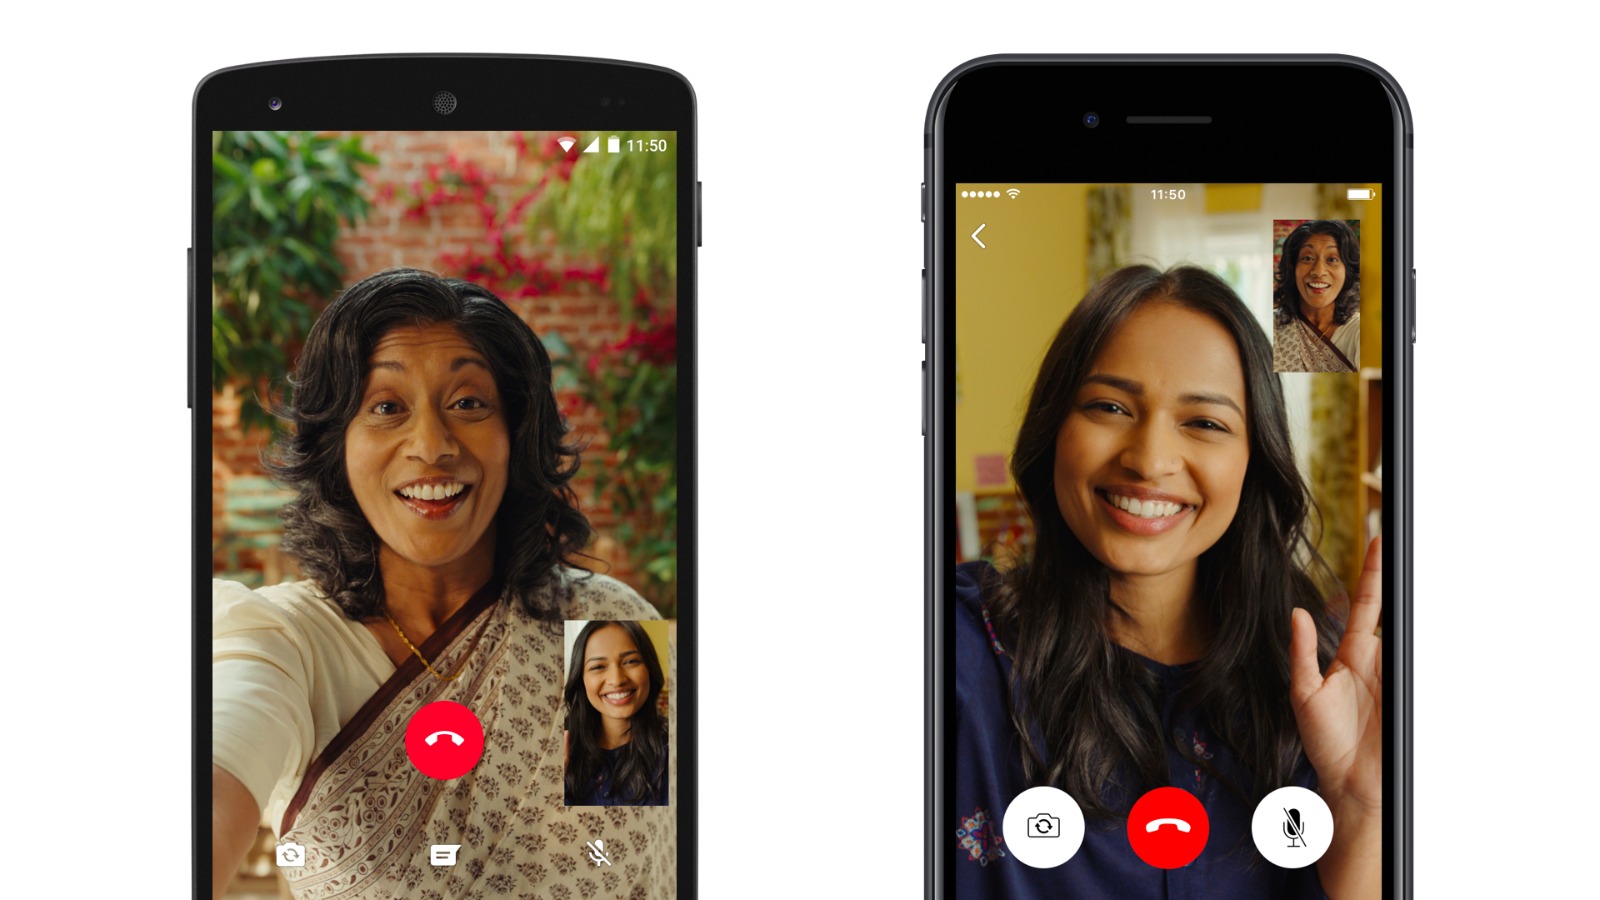 WhatsApp officially adds video calling functionality